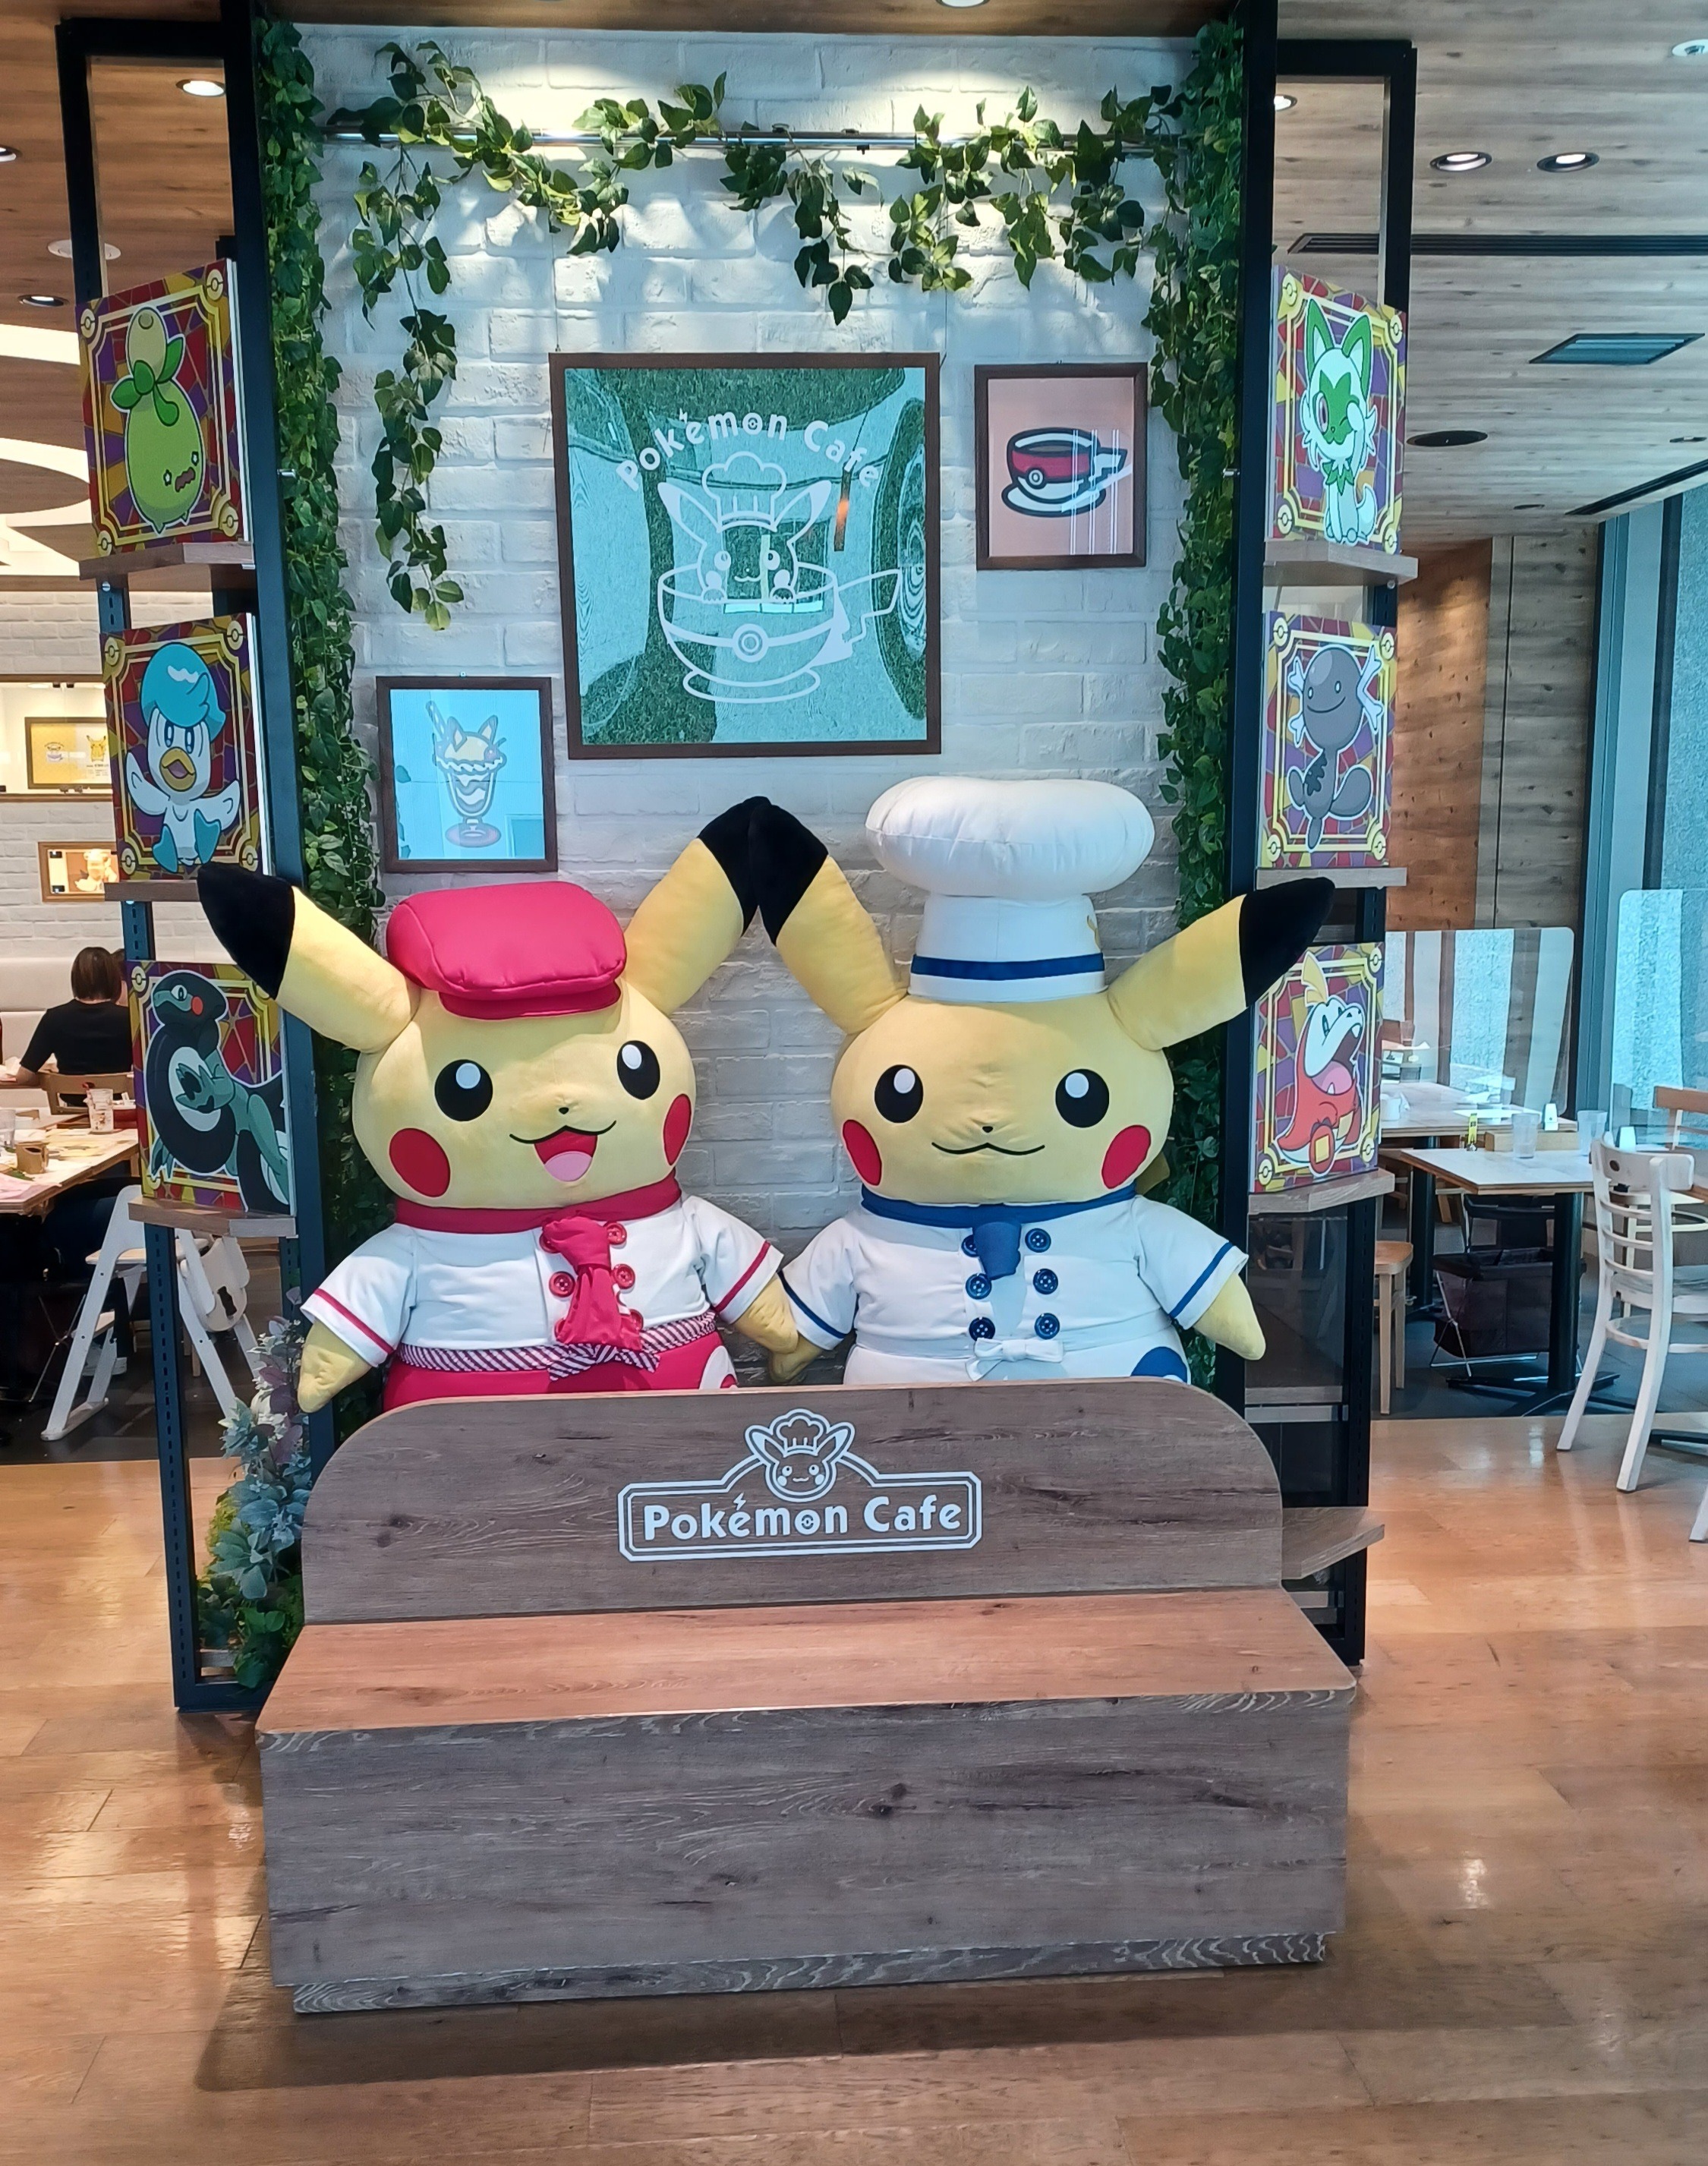 Two large Pikachu stuffed animals behind a Pokémon Café bench. The left one is dressed in a waiter's uniform, and the right one wears a chef's outfit. There are some picture of other Pokémon on the right side and an ivy plant in the back.